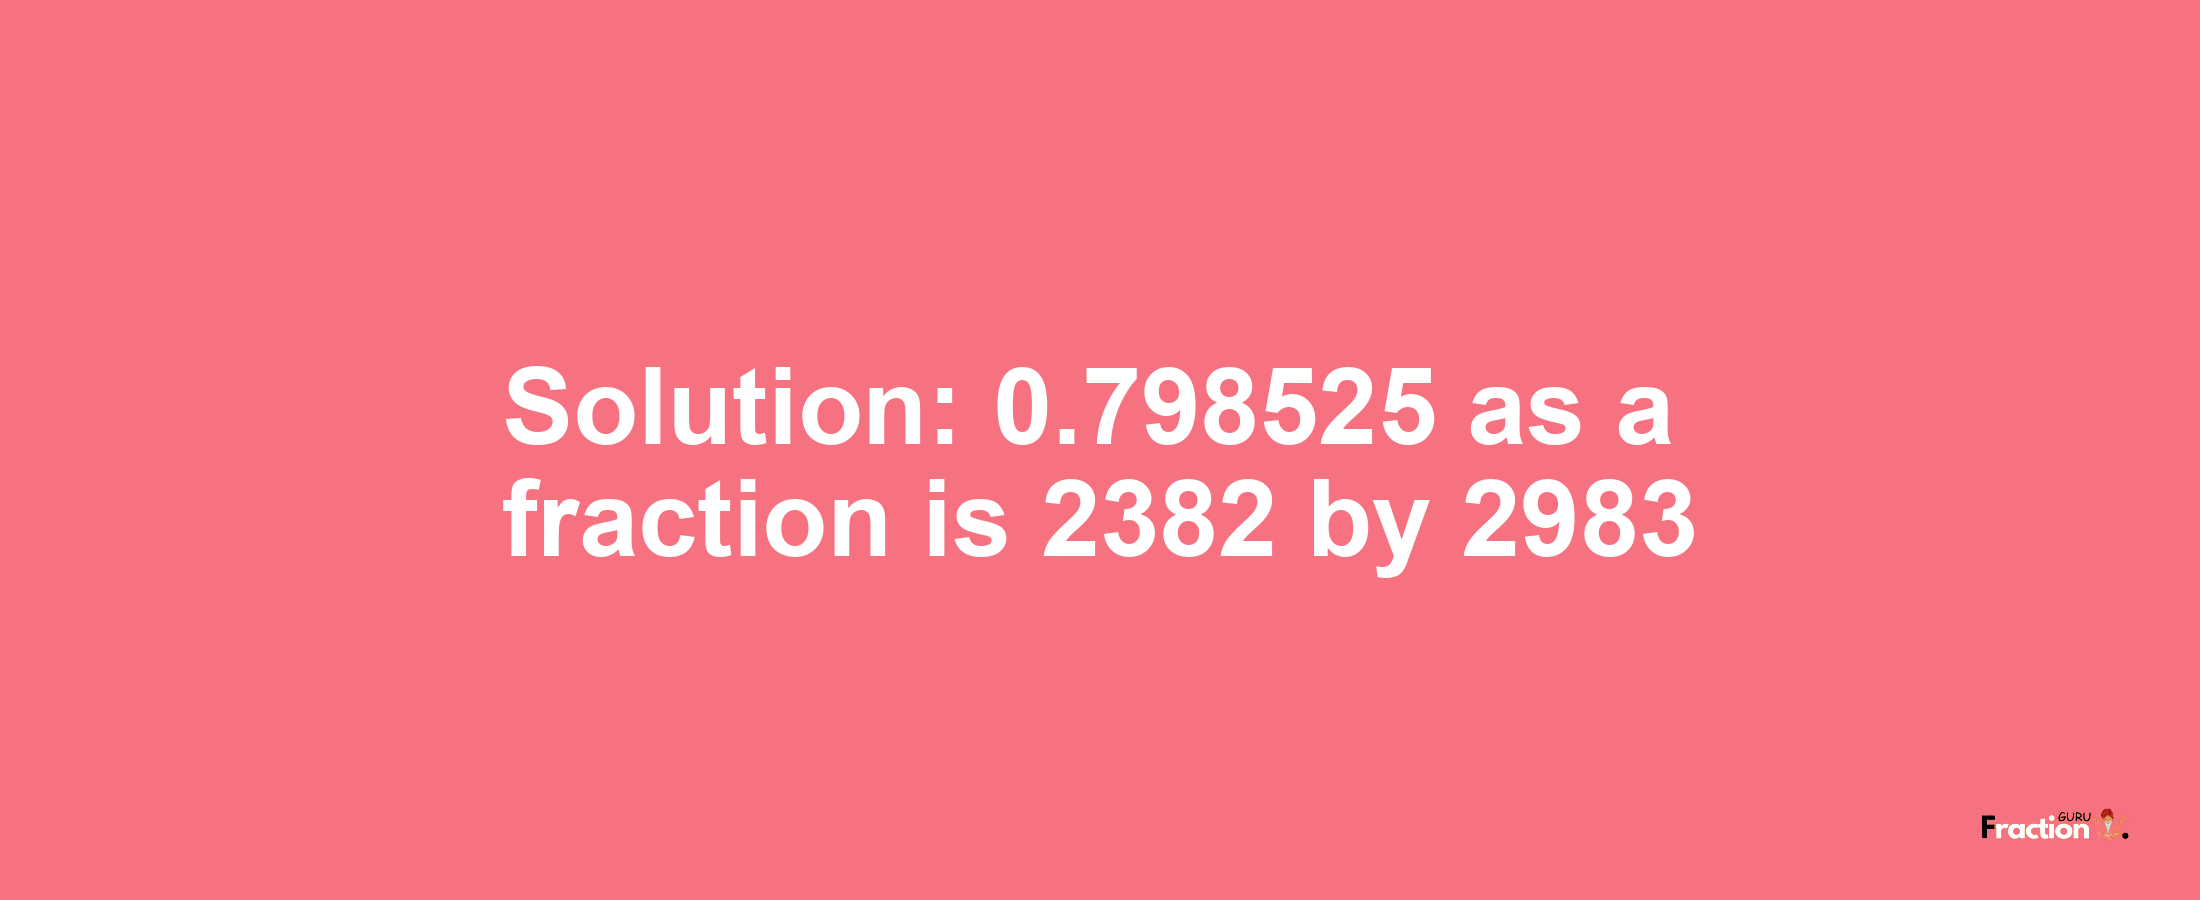 Solution:0.798525 as a fraction is 2382/2983